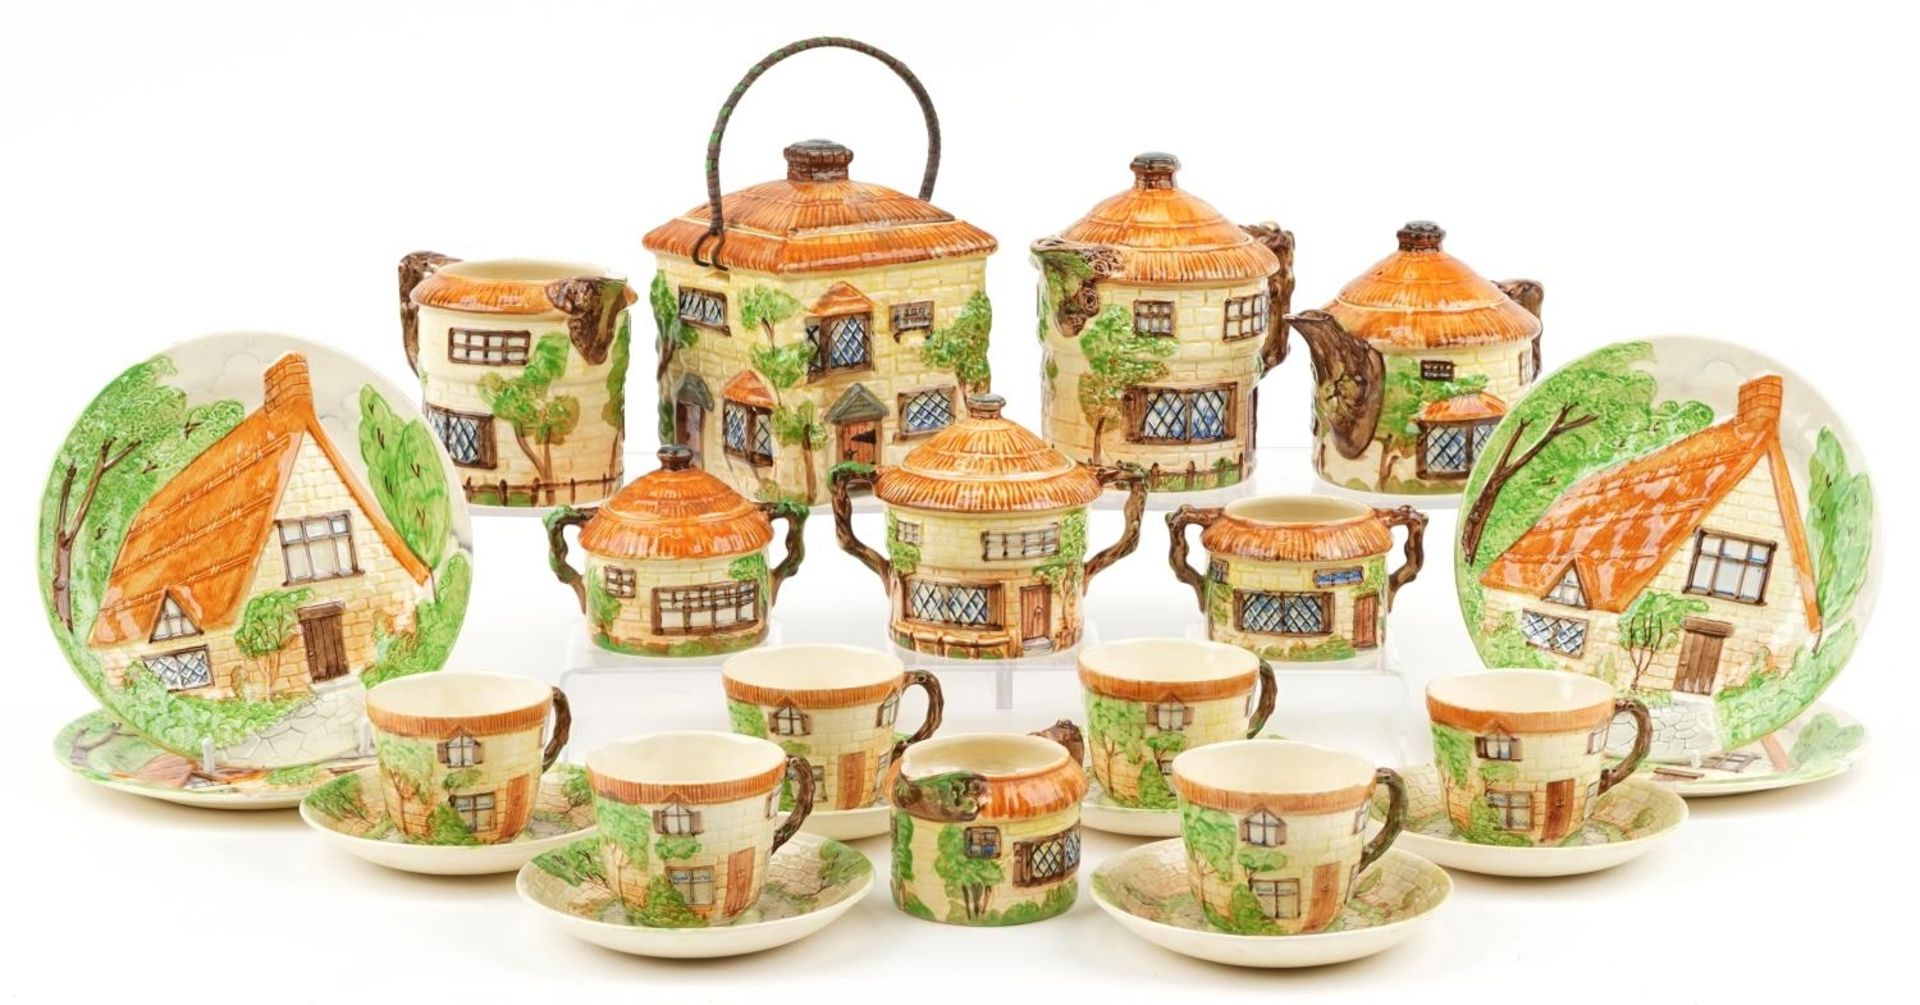 Beswick Cottage Ware including a six place tea service and biscuit barrel with cover, the largest